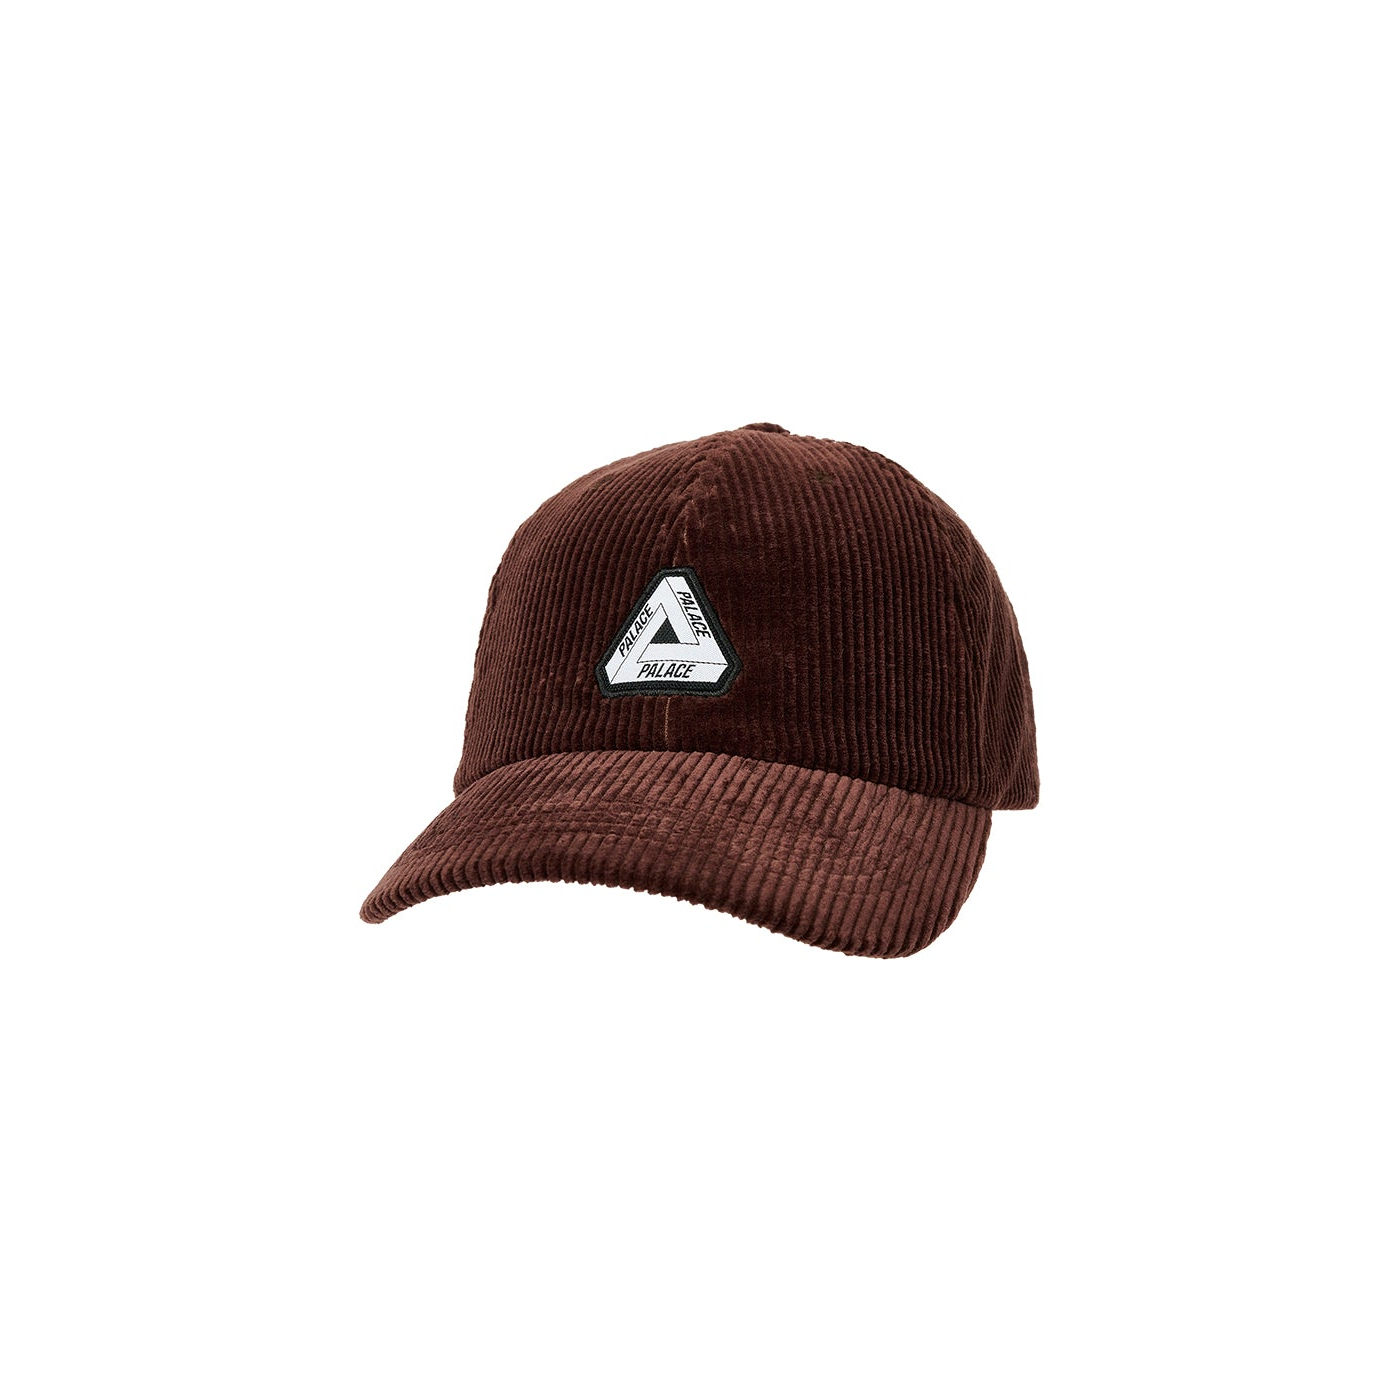 Thumbnail CORD TRI-FERG PATCH 6-PANEL BROWN one color